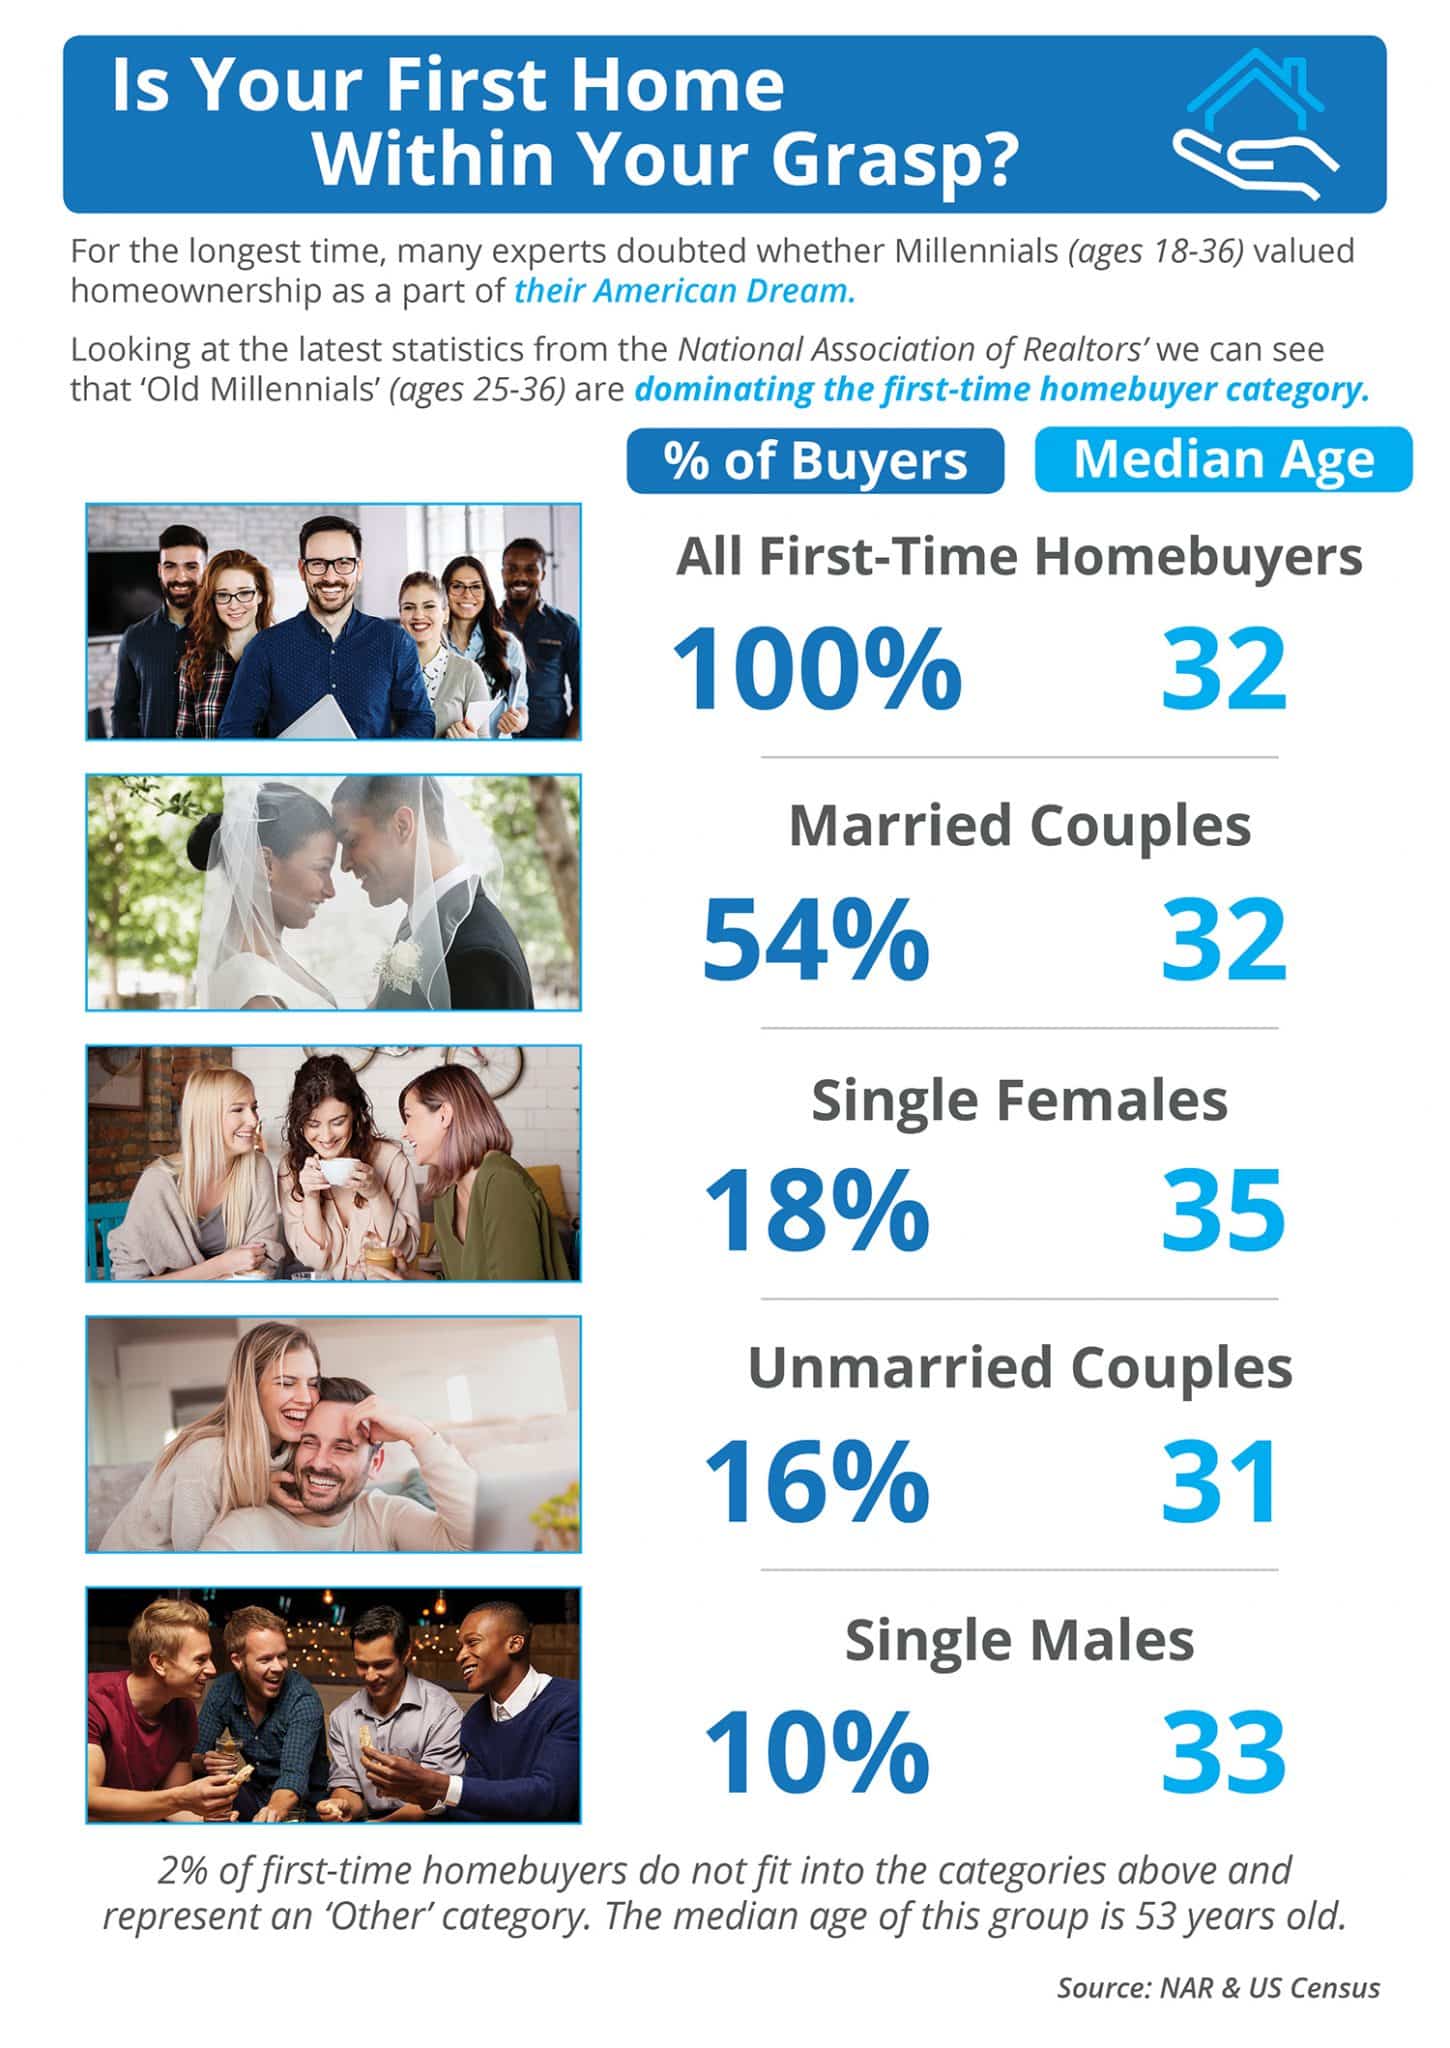 Is Your First Home Now Within Your Grasp? [INFOGRAPHIC] 